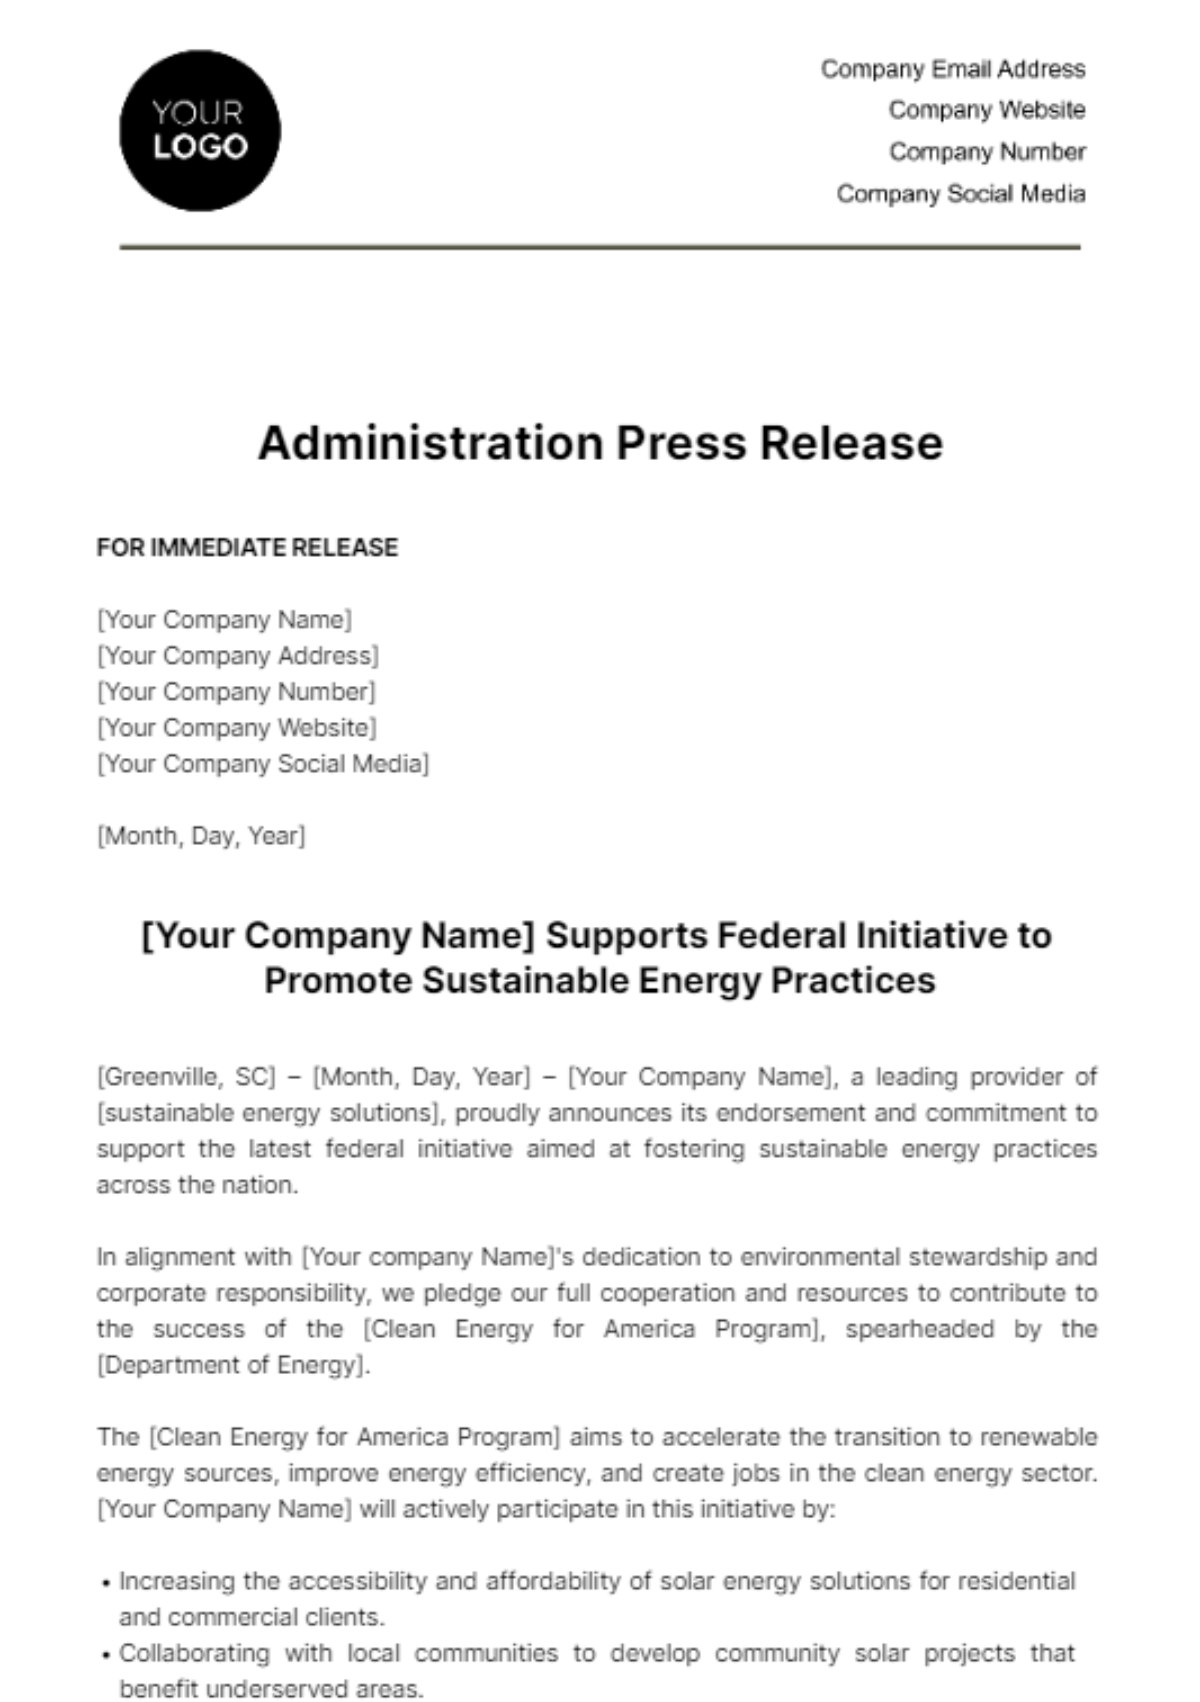 Free Administration Press Release Template